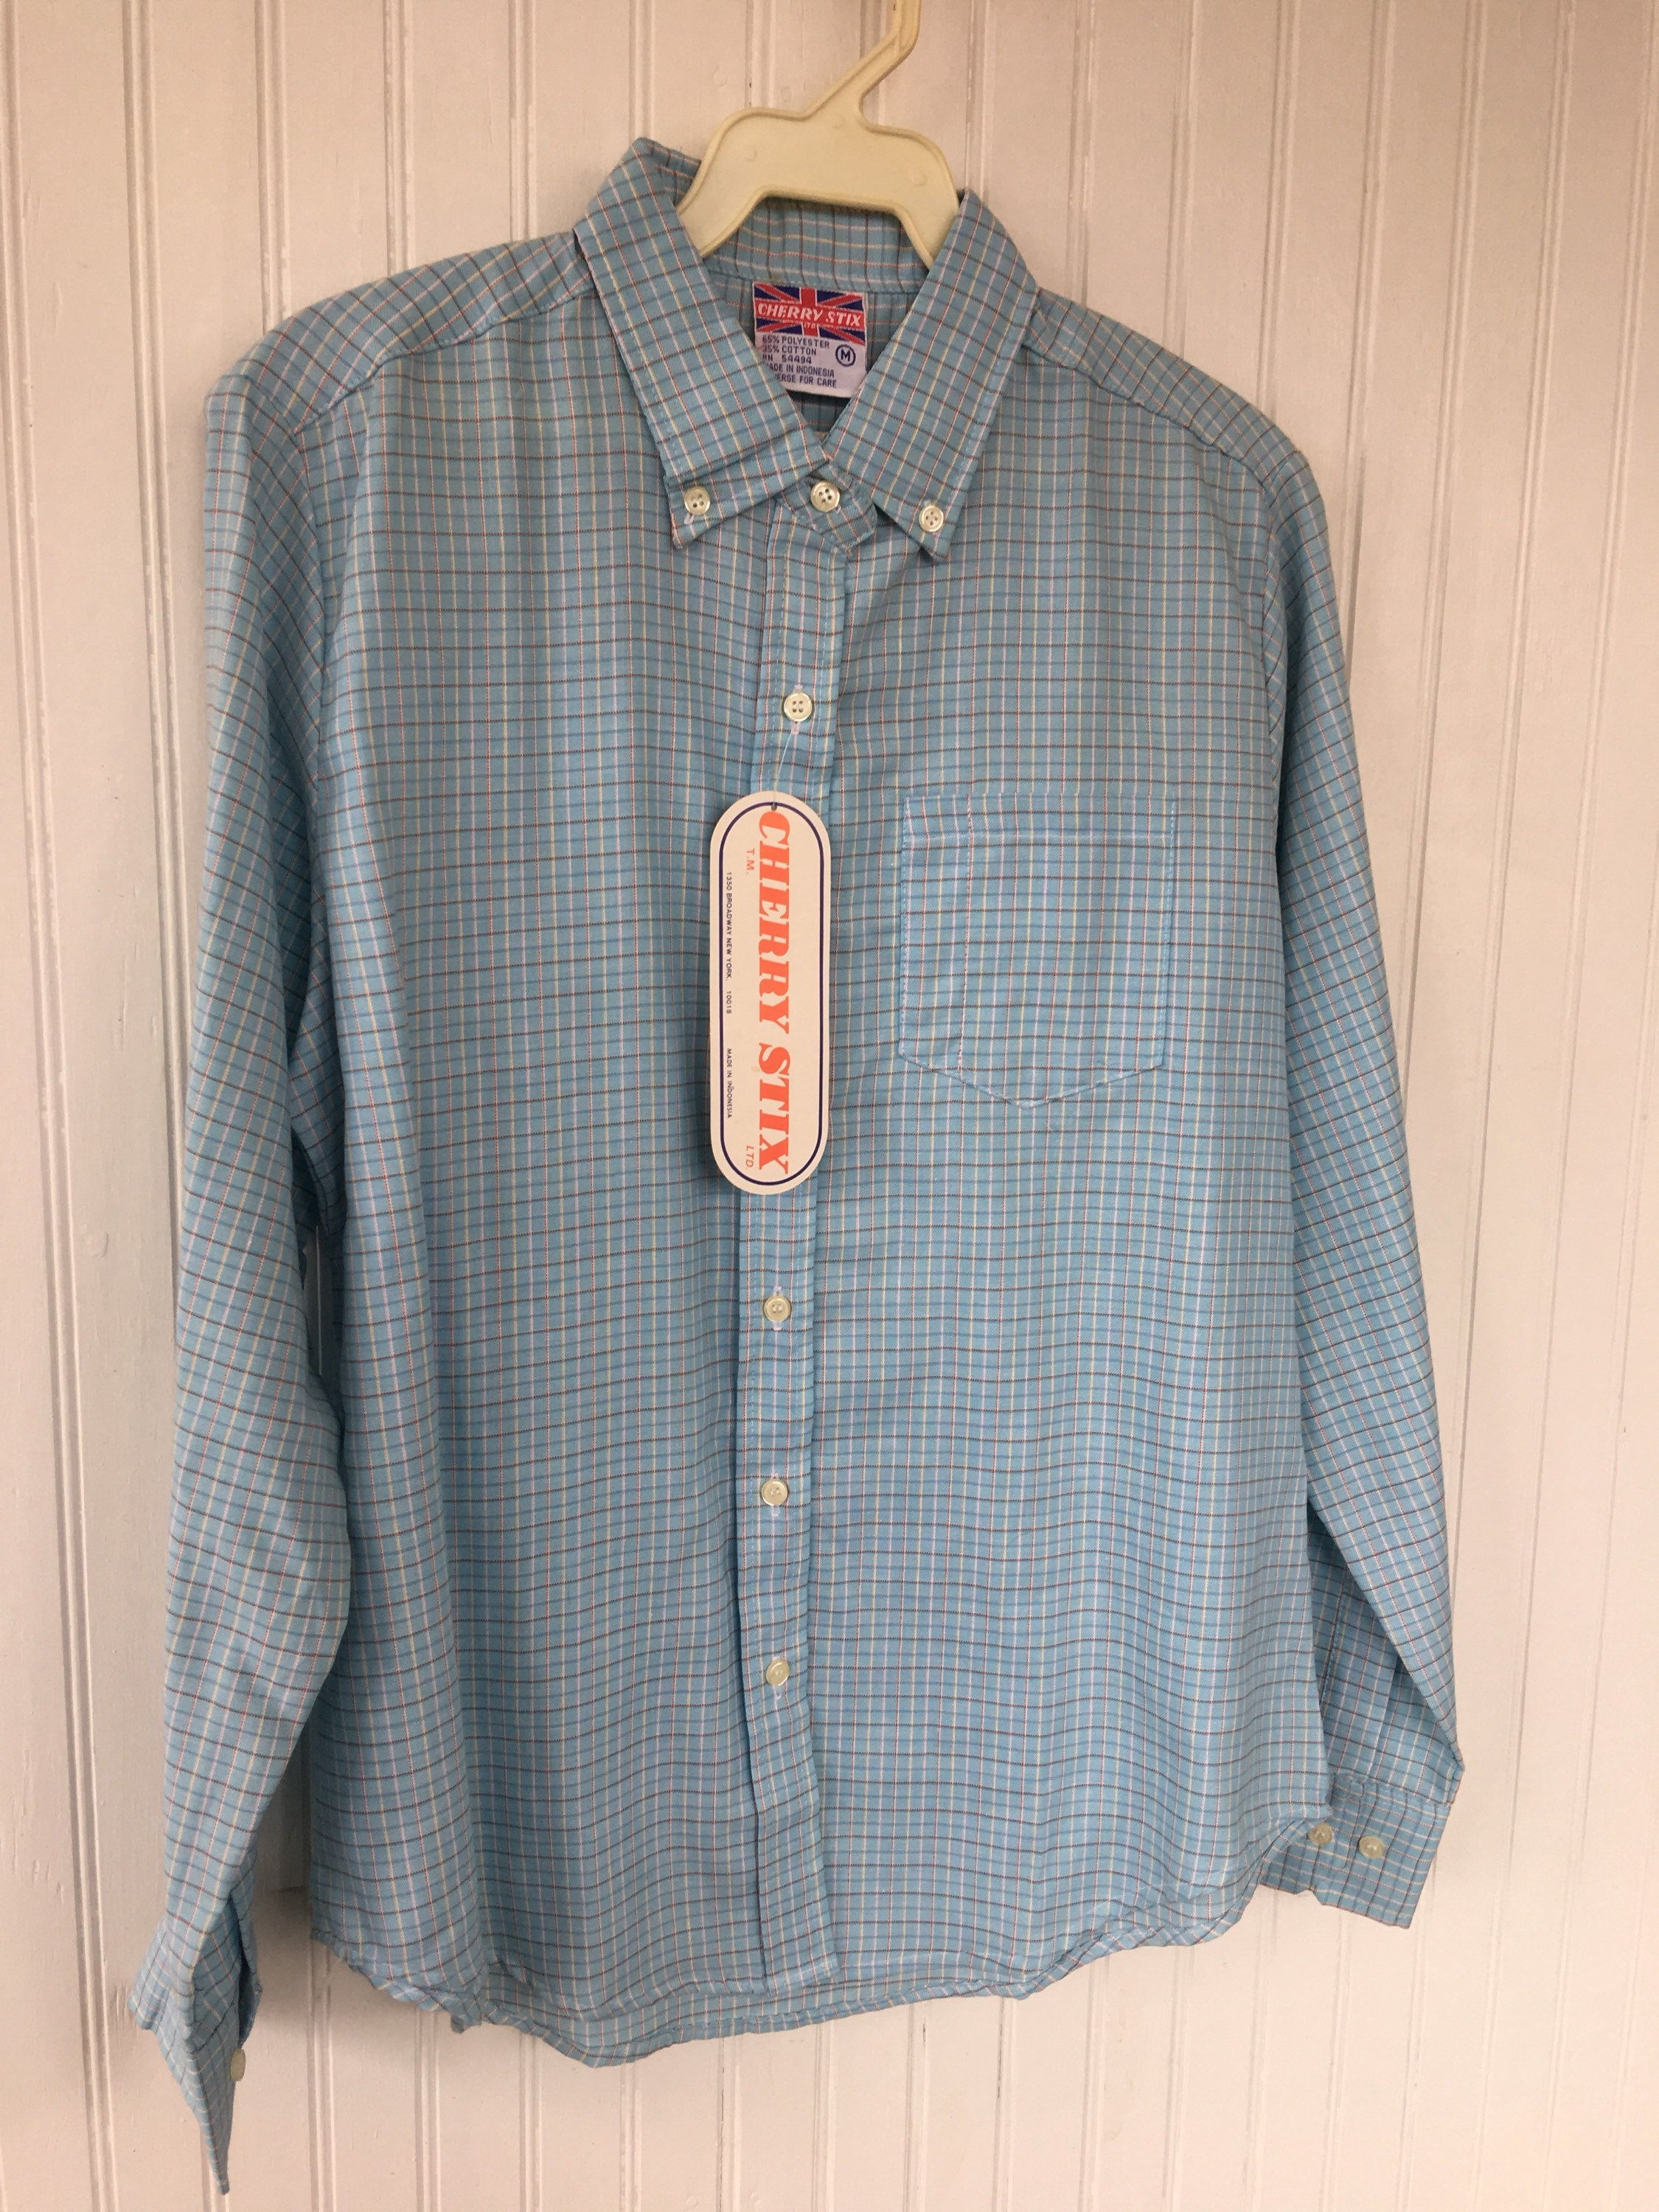 Vintage 80s Deadstock Baby Blue Plaid Button Down Shirt Top Size Small ...